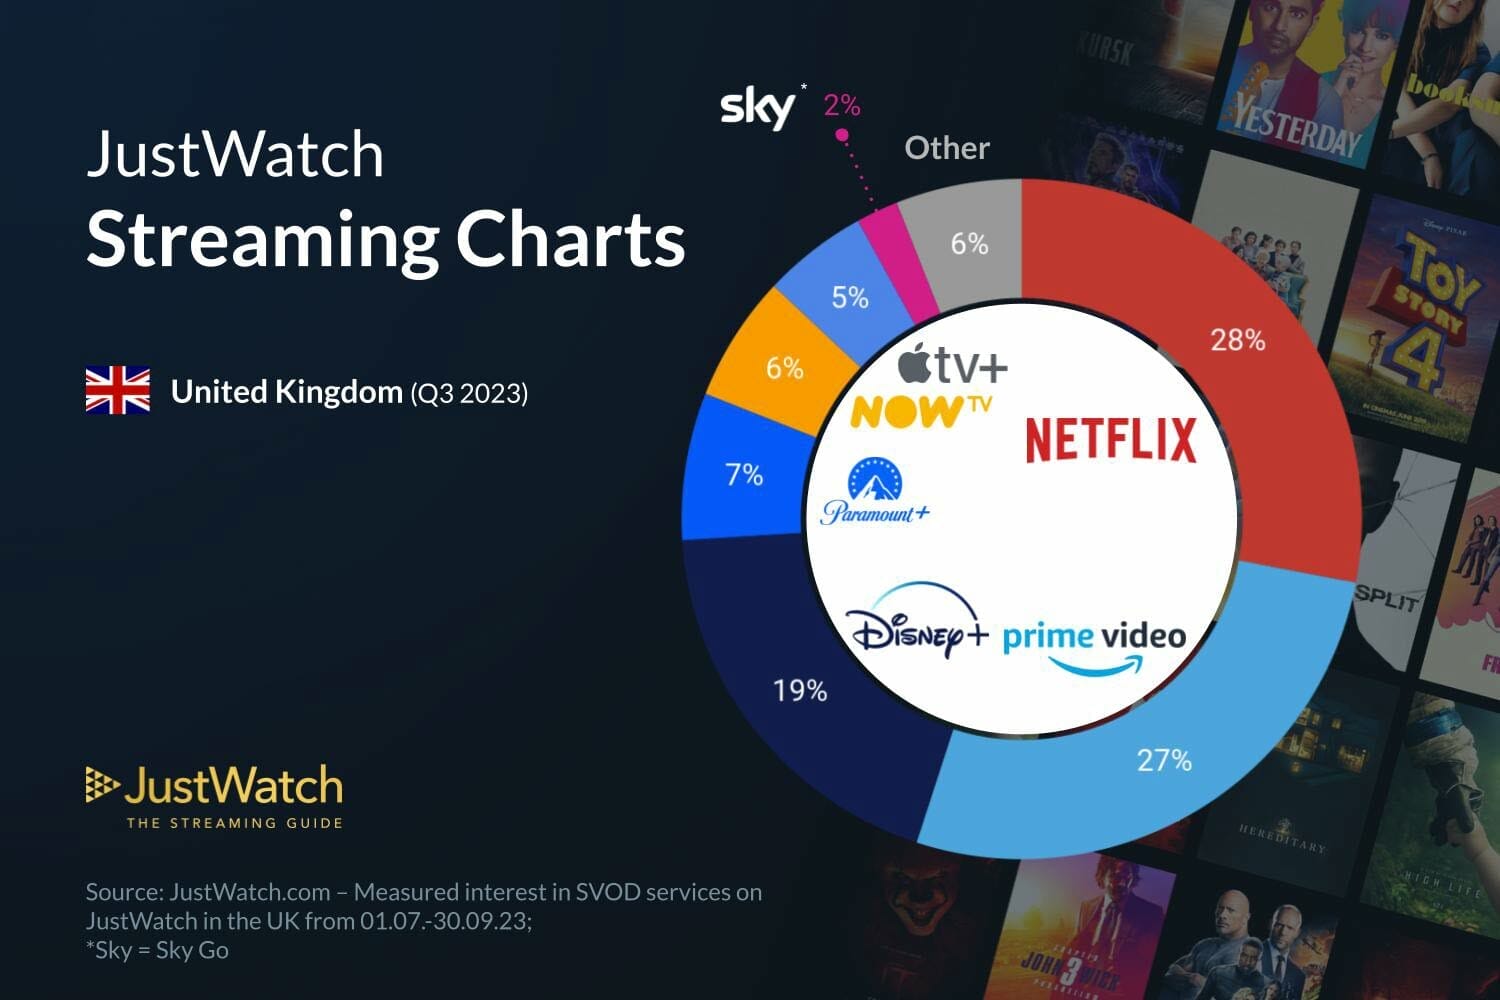 Streaming market share in the UK